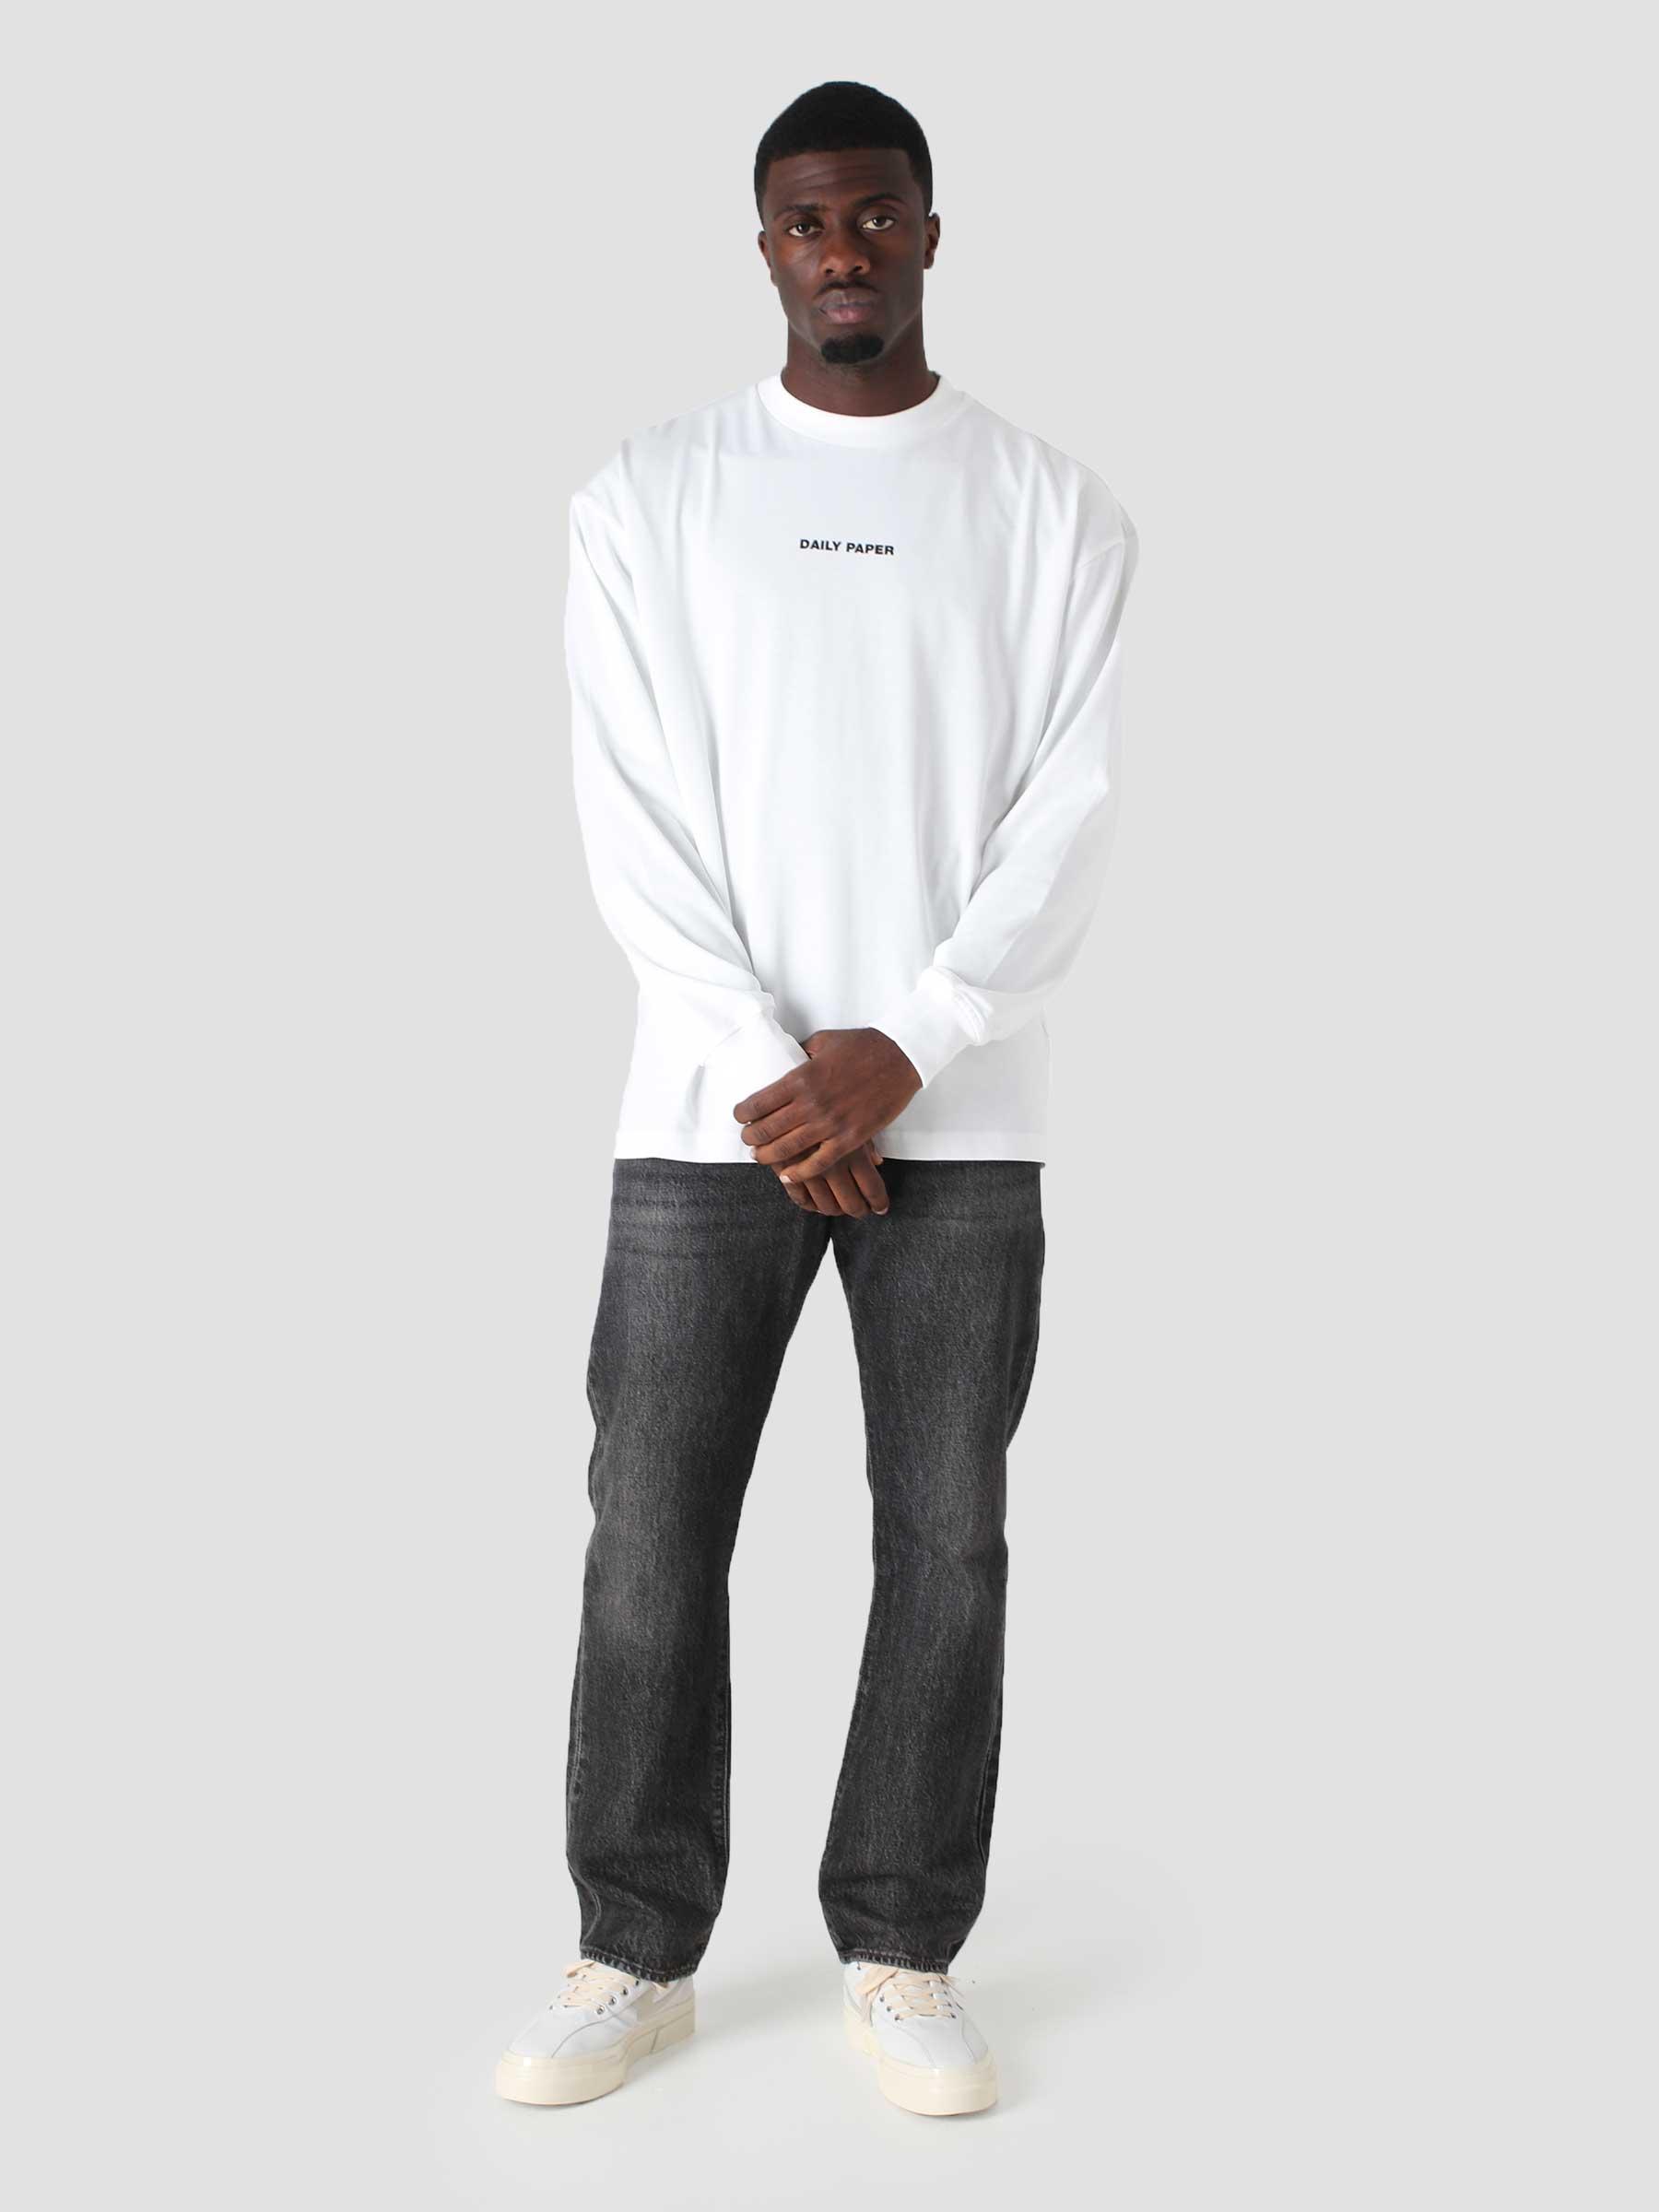 Daily Paper Remulti Long-Sleeve - 2123065-blk - Sneakersnstuff (SNS)